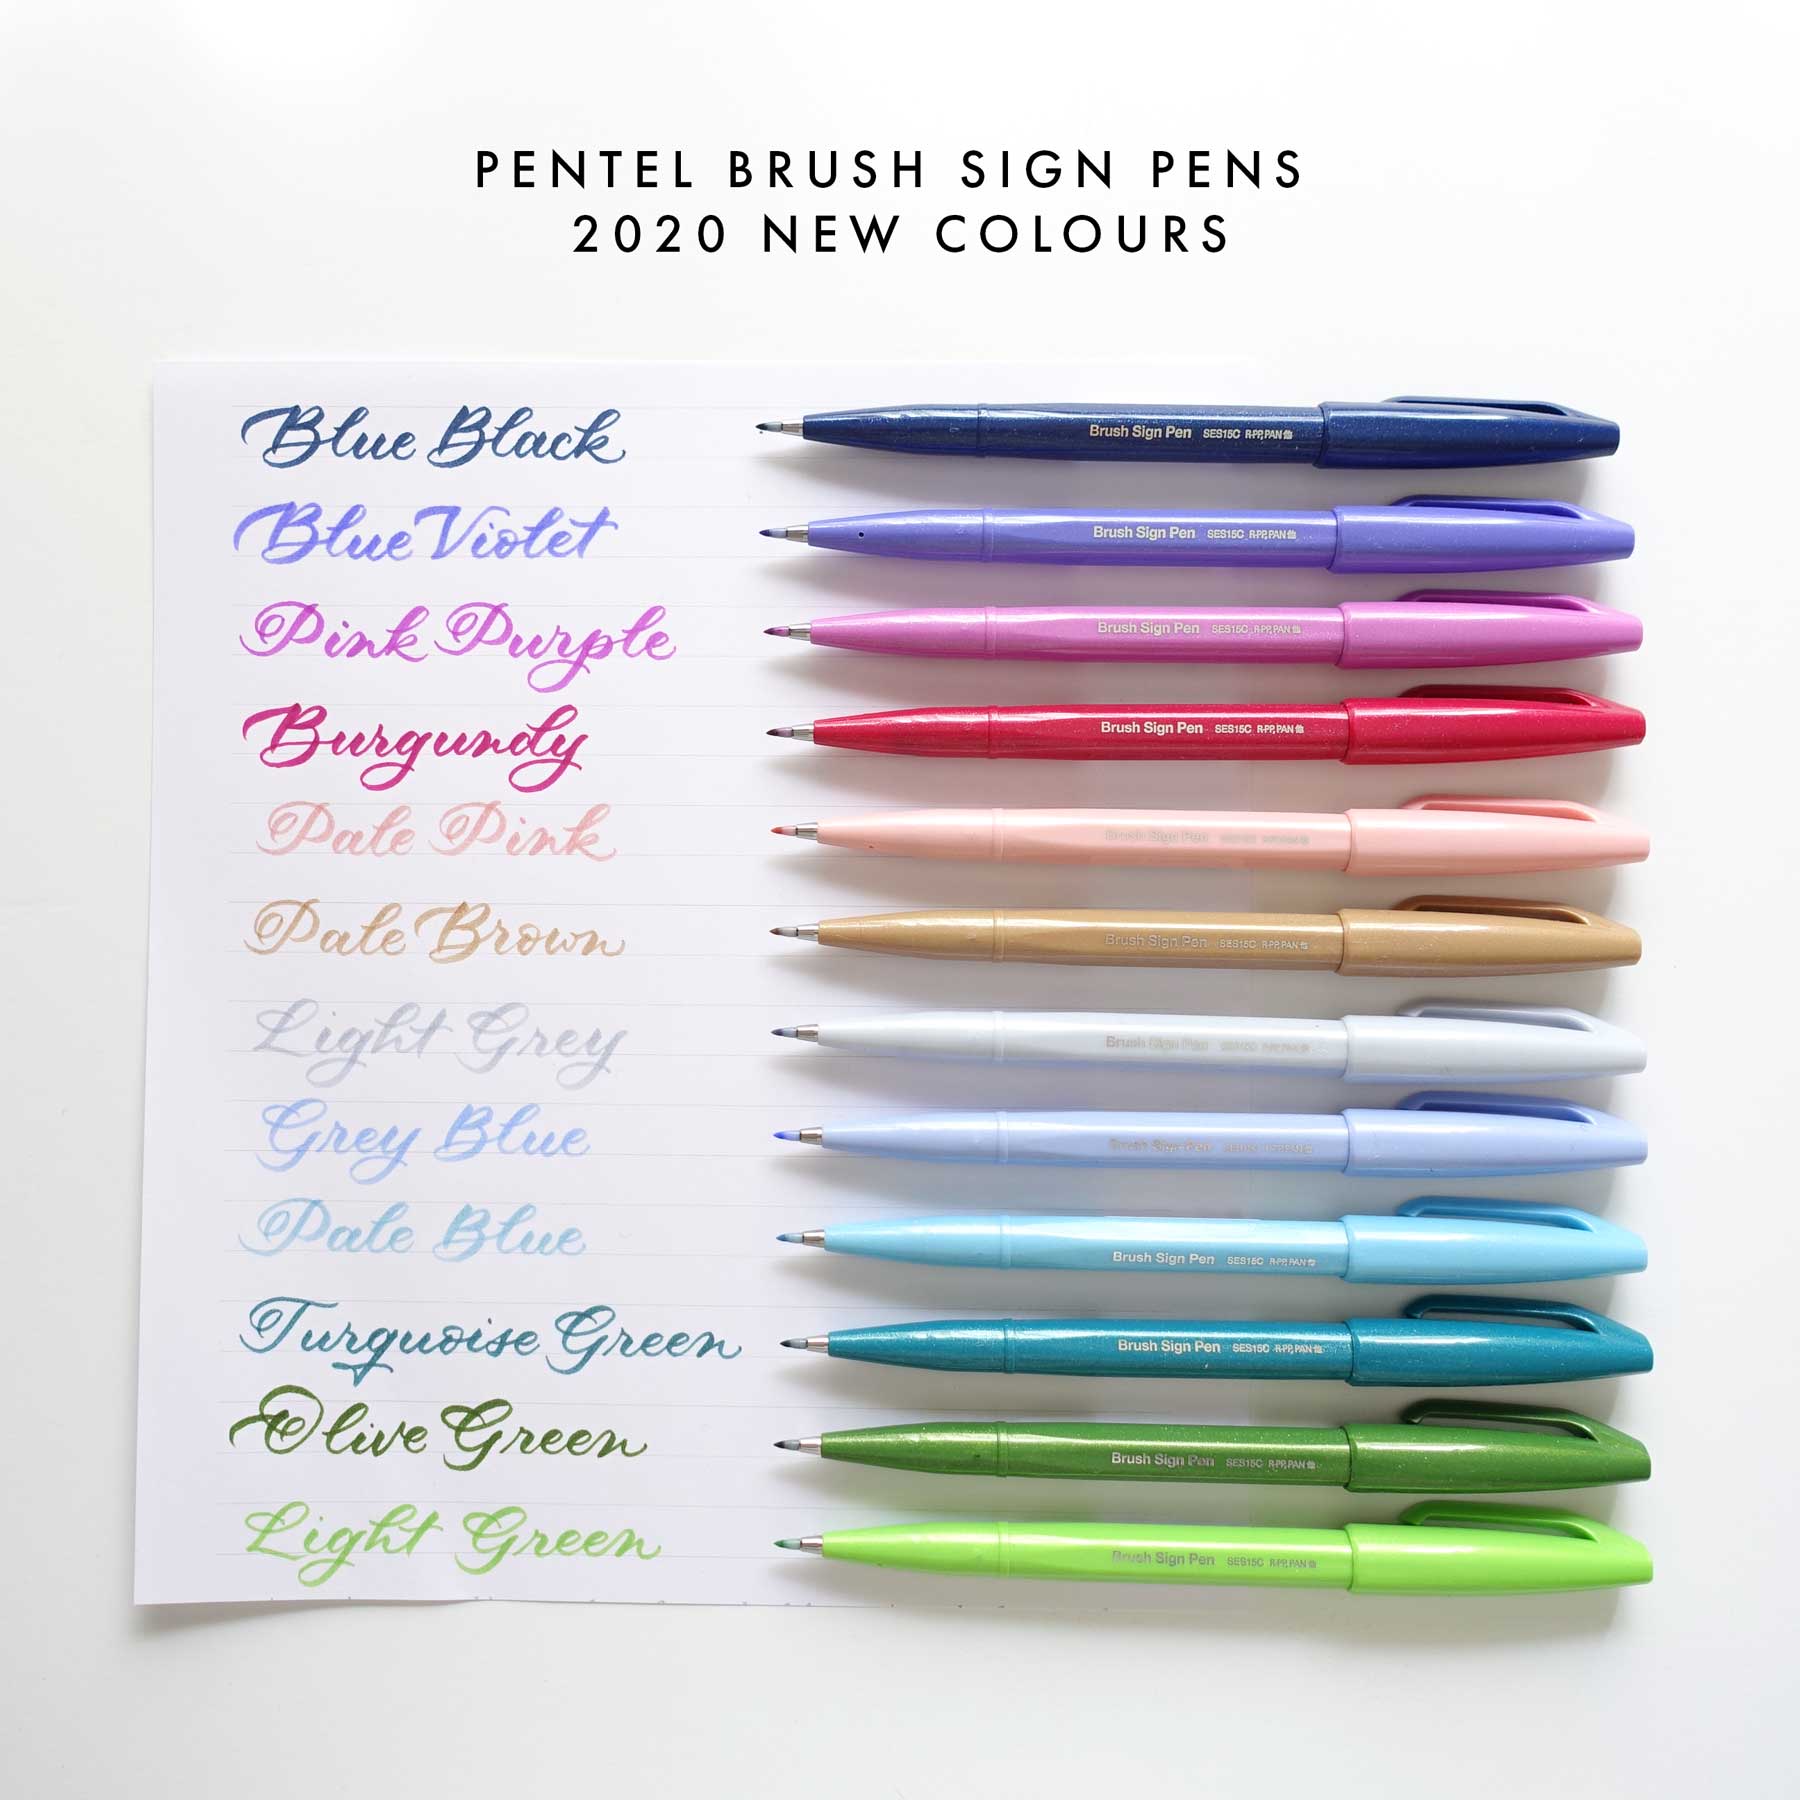 pentel fude touch brush sign pen - 12-pack - 2020 new colors